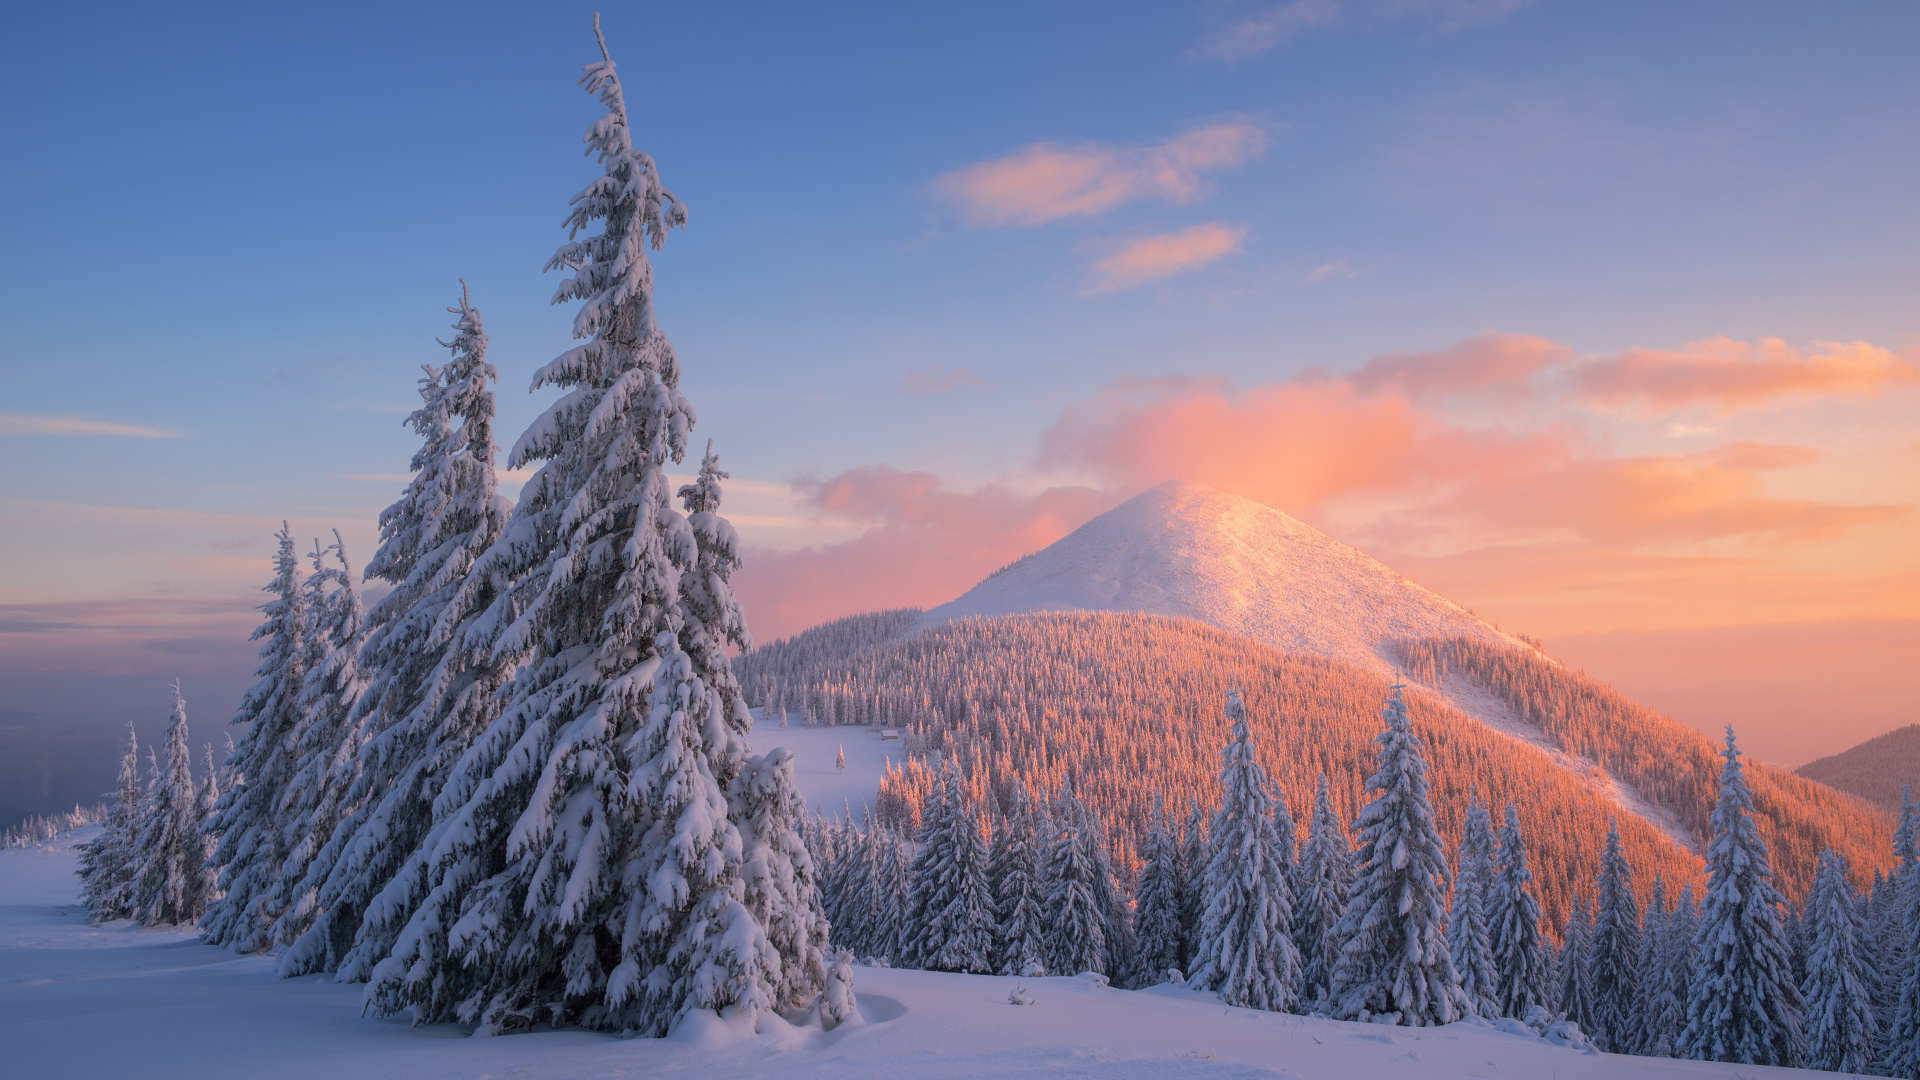 Snow Covered Pine Trees and Mountains During Daytime. Wallpaper in 1920x1080 Resolution